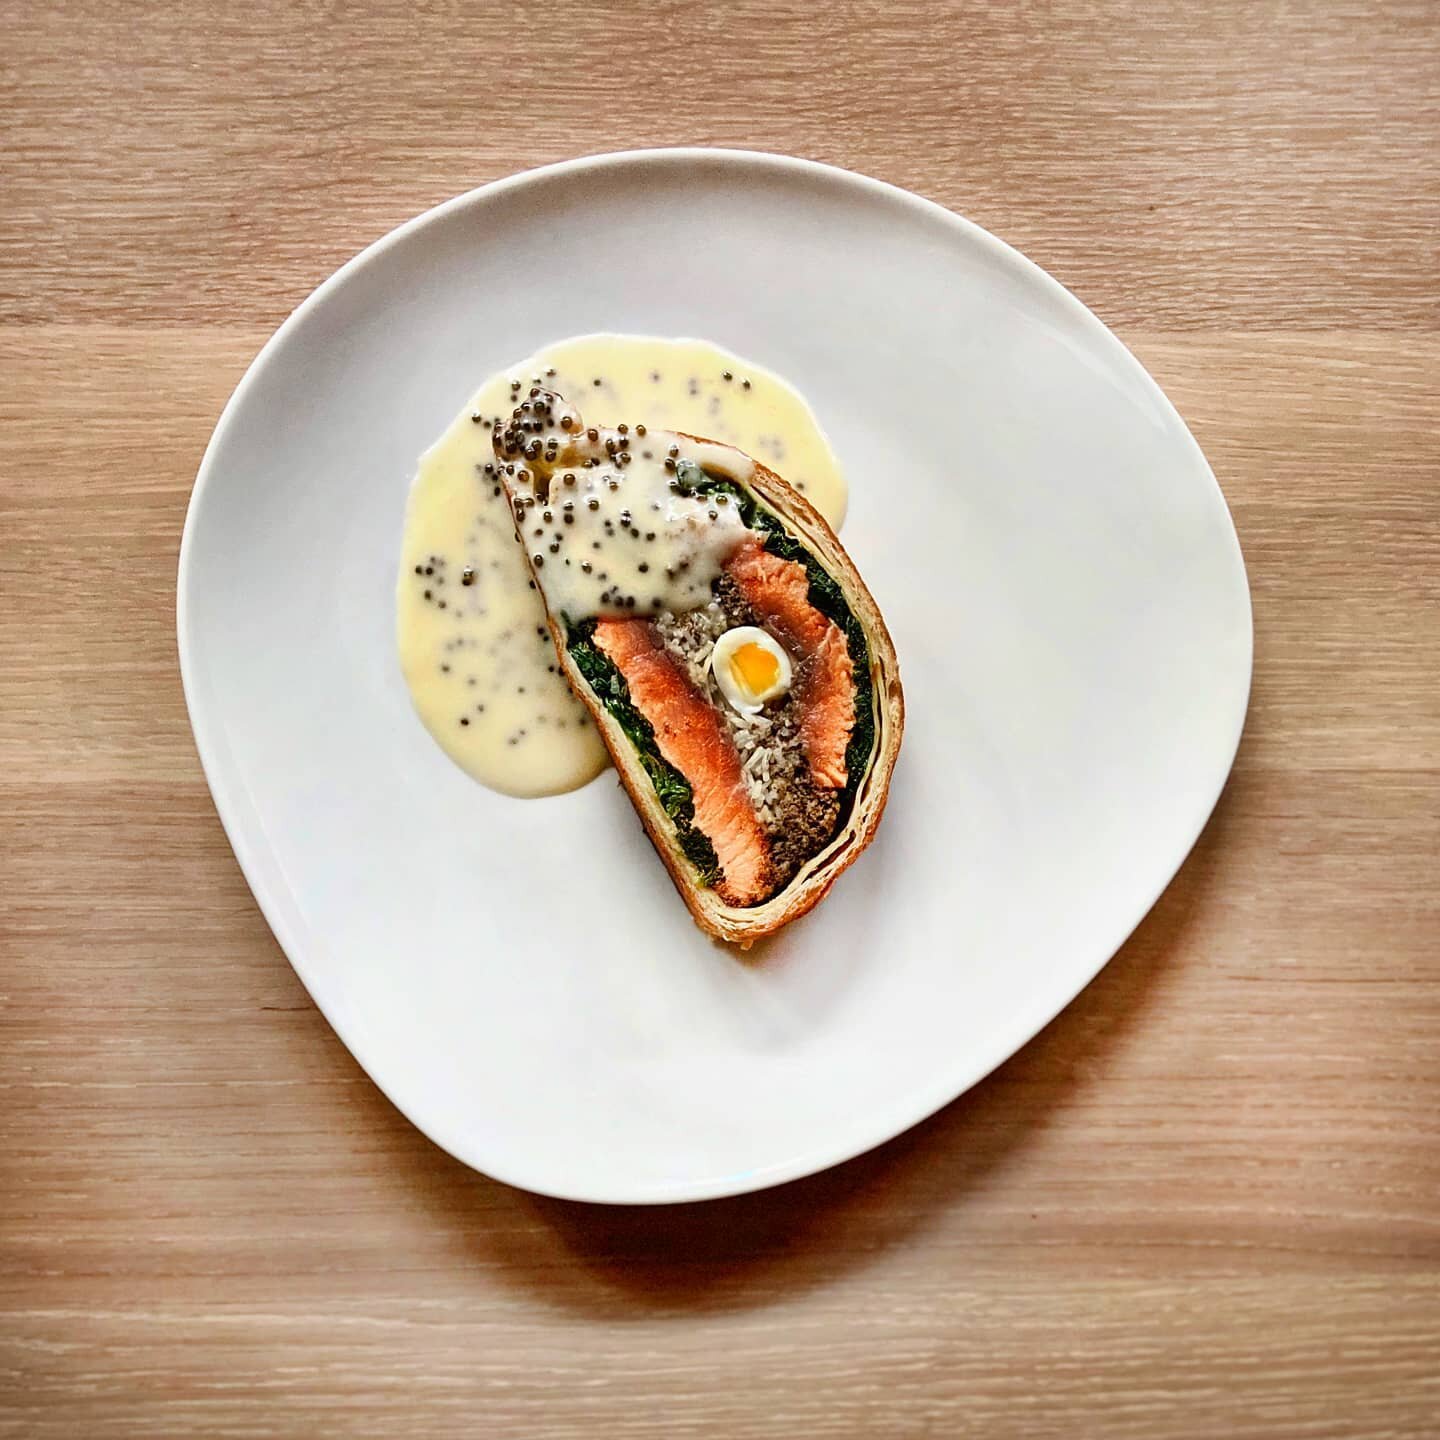 Classics never get old. Salmon Coulibiac, Mushroom Duxelle, Basmati Rice, Quail Egg, Champagne Beurre Fondue with @kaviari_paris Golden Oscetra Caviar. Inspiration is depicted from my recent trip to the Northwest region. Salmon from @skunabay is a de